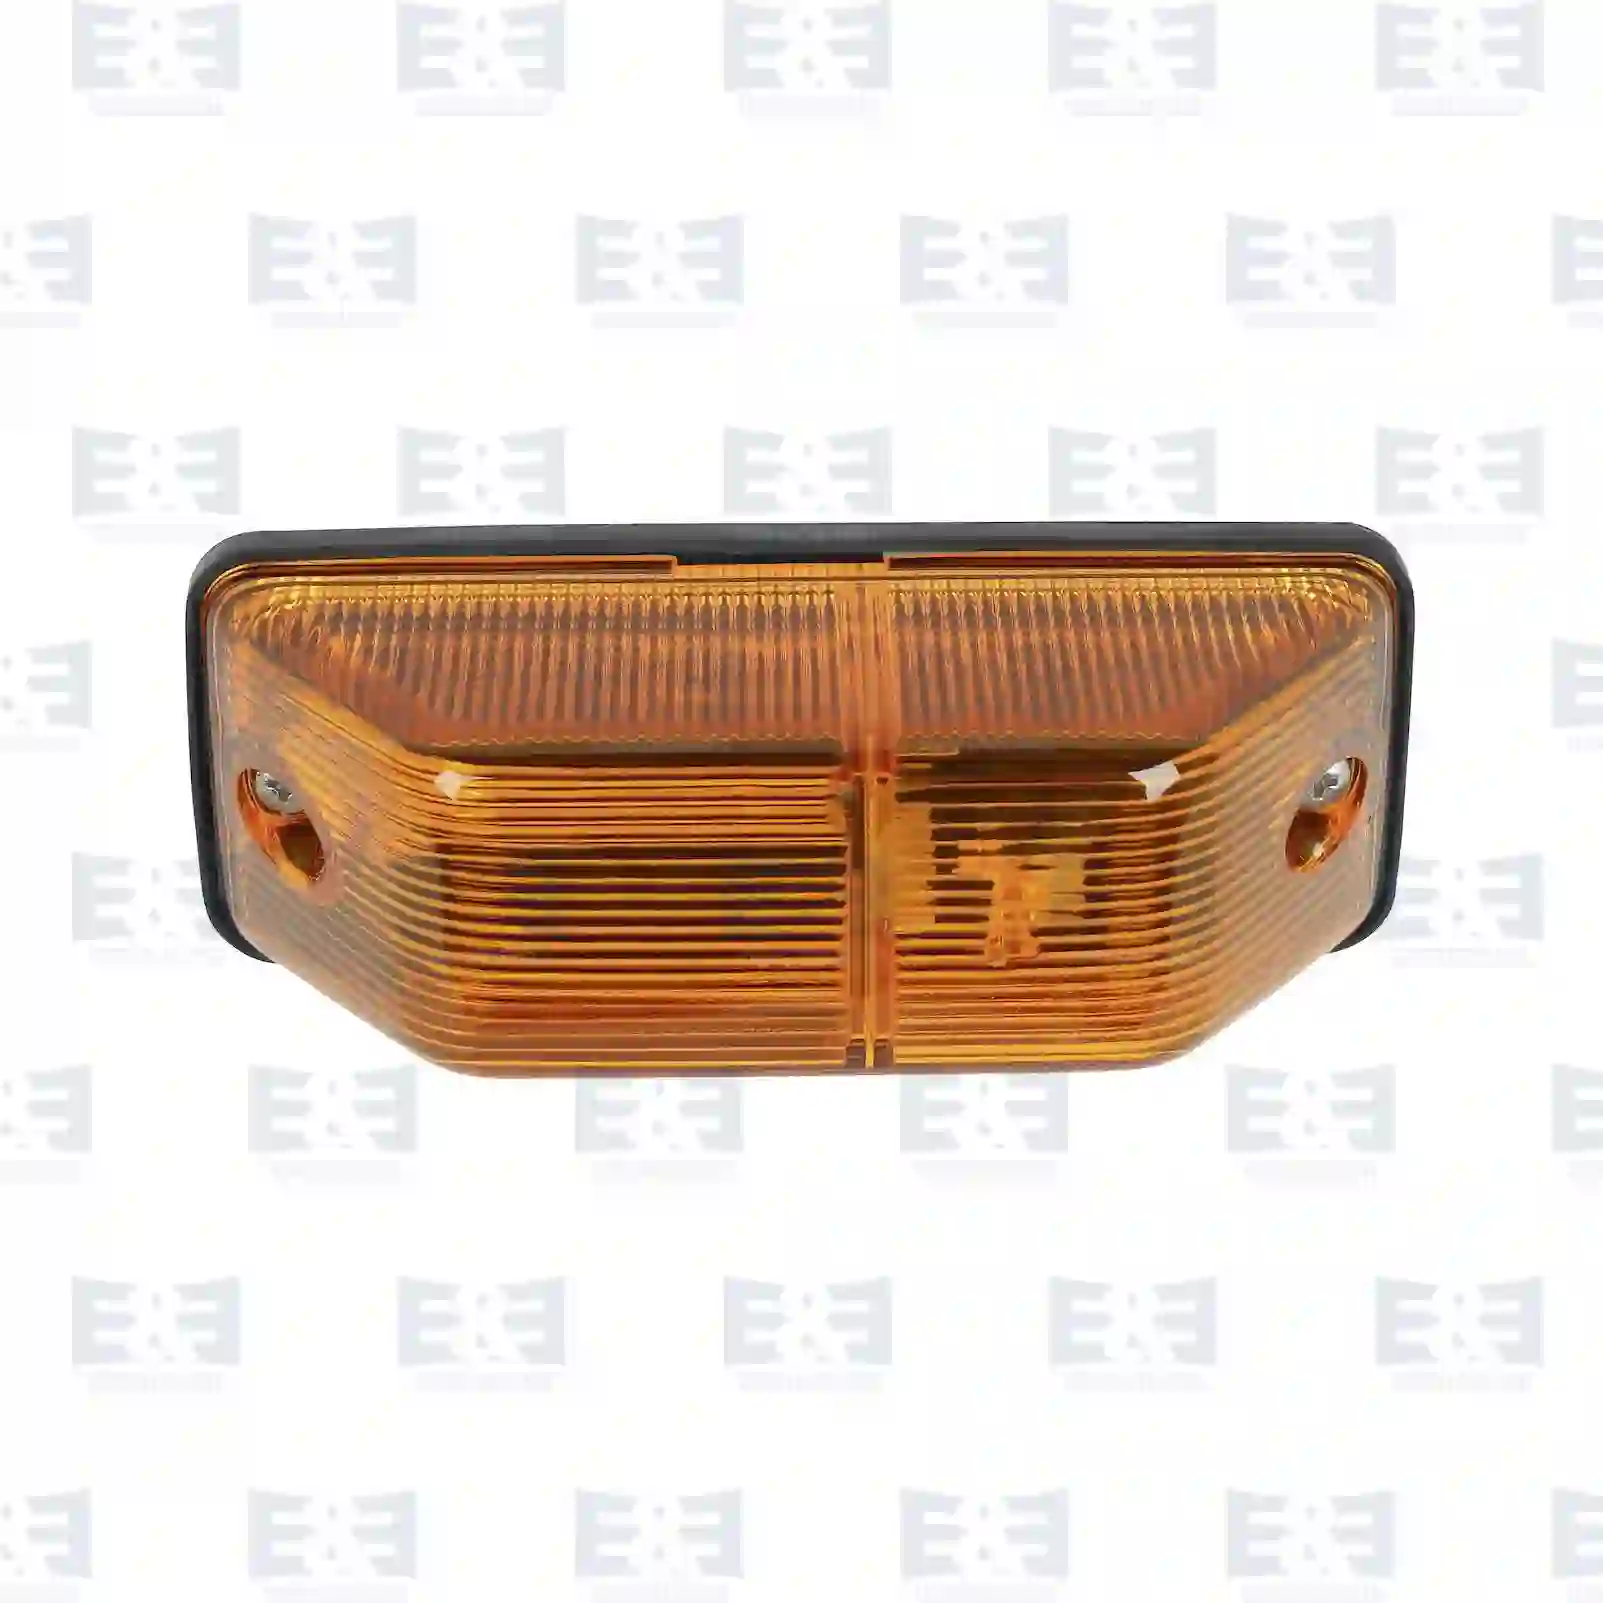 Turn signal lamp, lateral, right, without bulb, 2E2290797, 0867455, 867455, 81252256460, 0018204021, 150314300, 70305331 ||  2E2290797 E&E Truck Spare Parts | Truck Spare Parts, Auotomotive Spare Parts Turn signal lamp, lateral, right, without bulb, 2E2290797, 0867455, 867455, 81252256460, 0018204021, 150314300, 70305331 ||  2E2290797 E&E Truck Spare Parts | Truck Spare Parts, Auotomotive Spare Parts